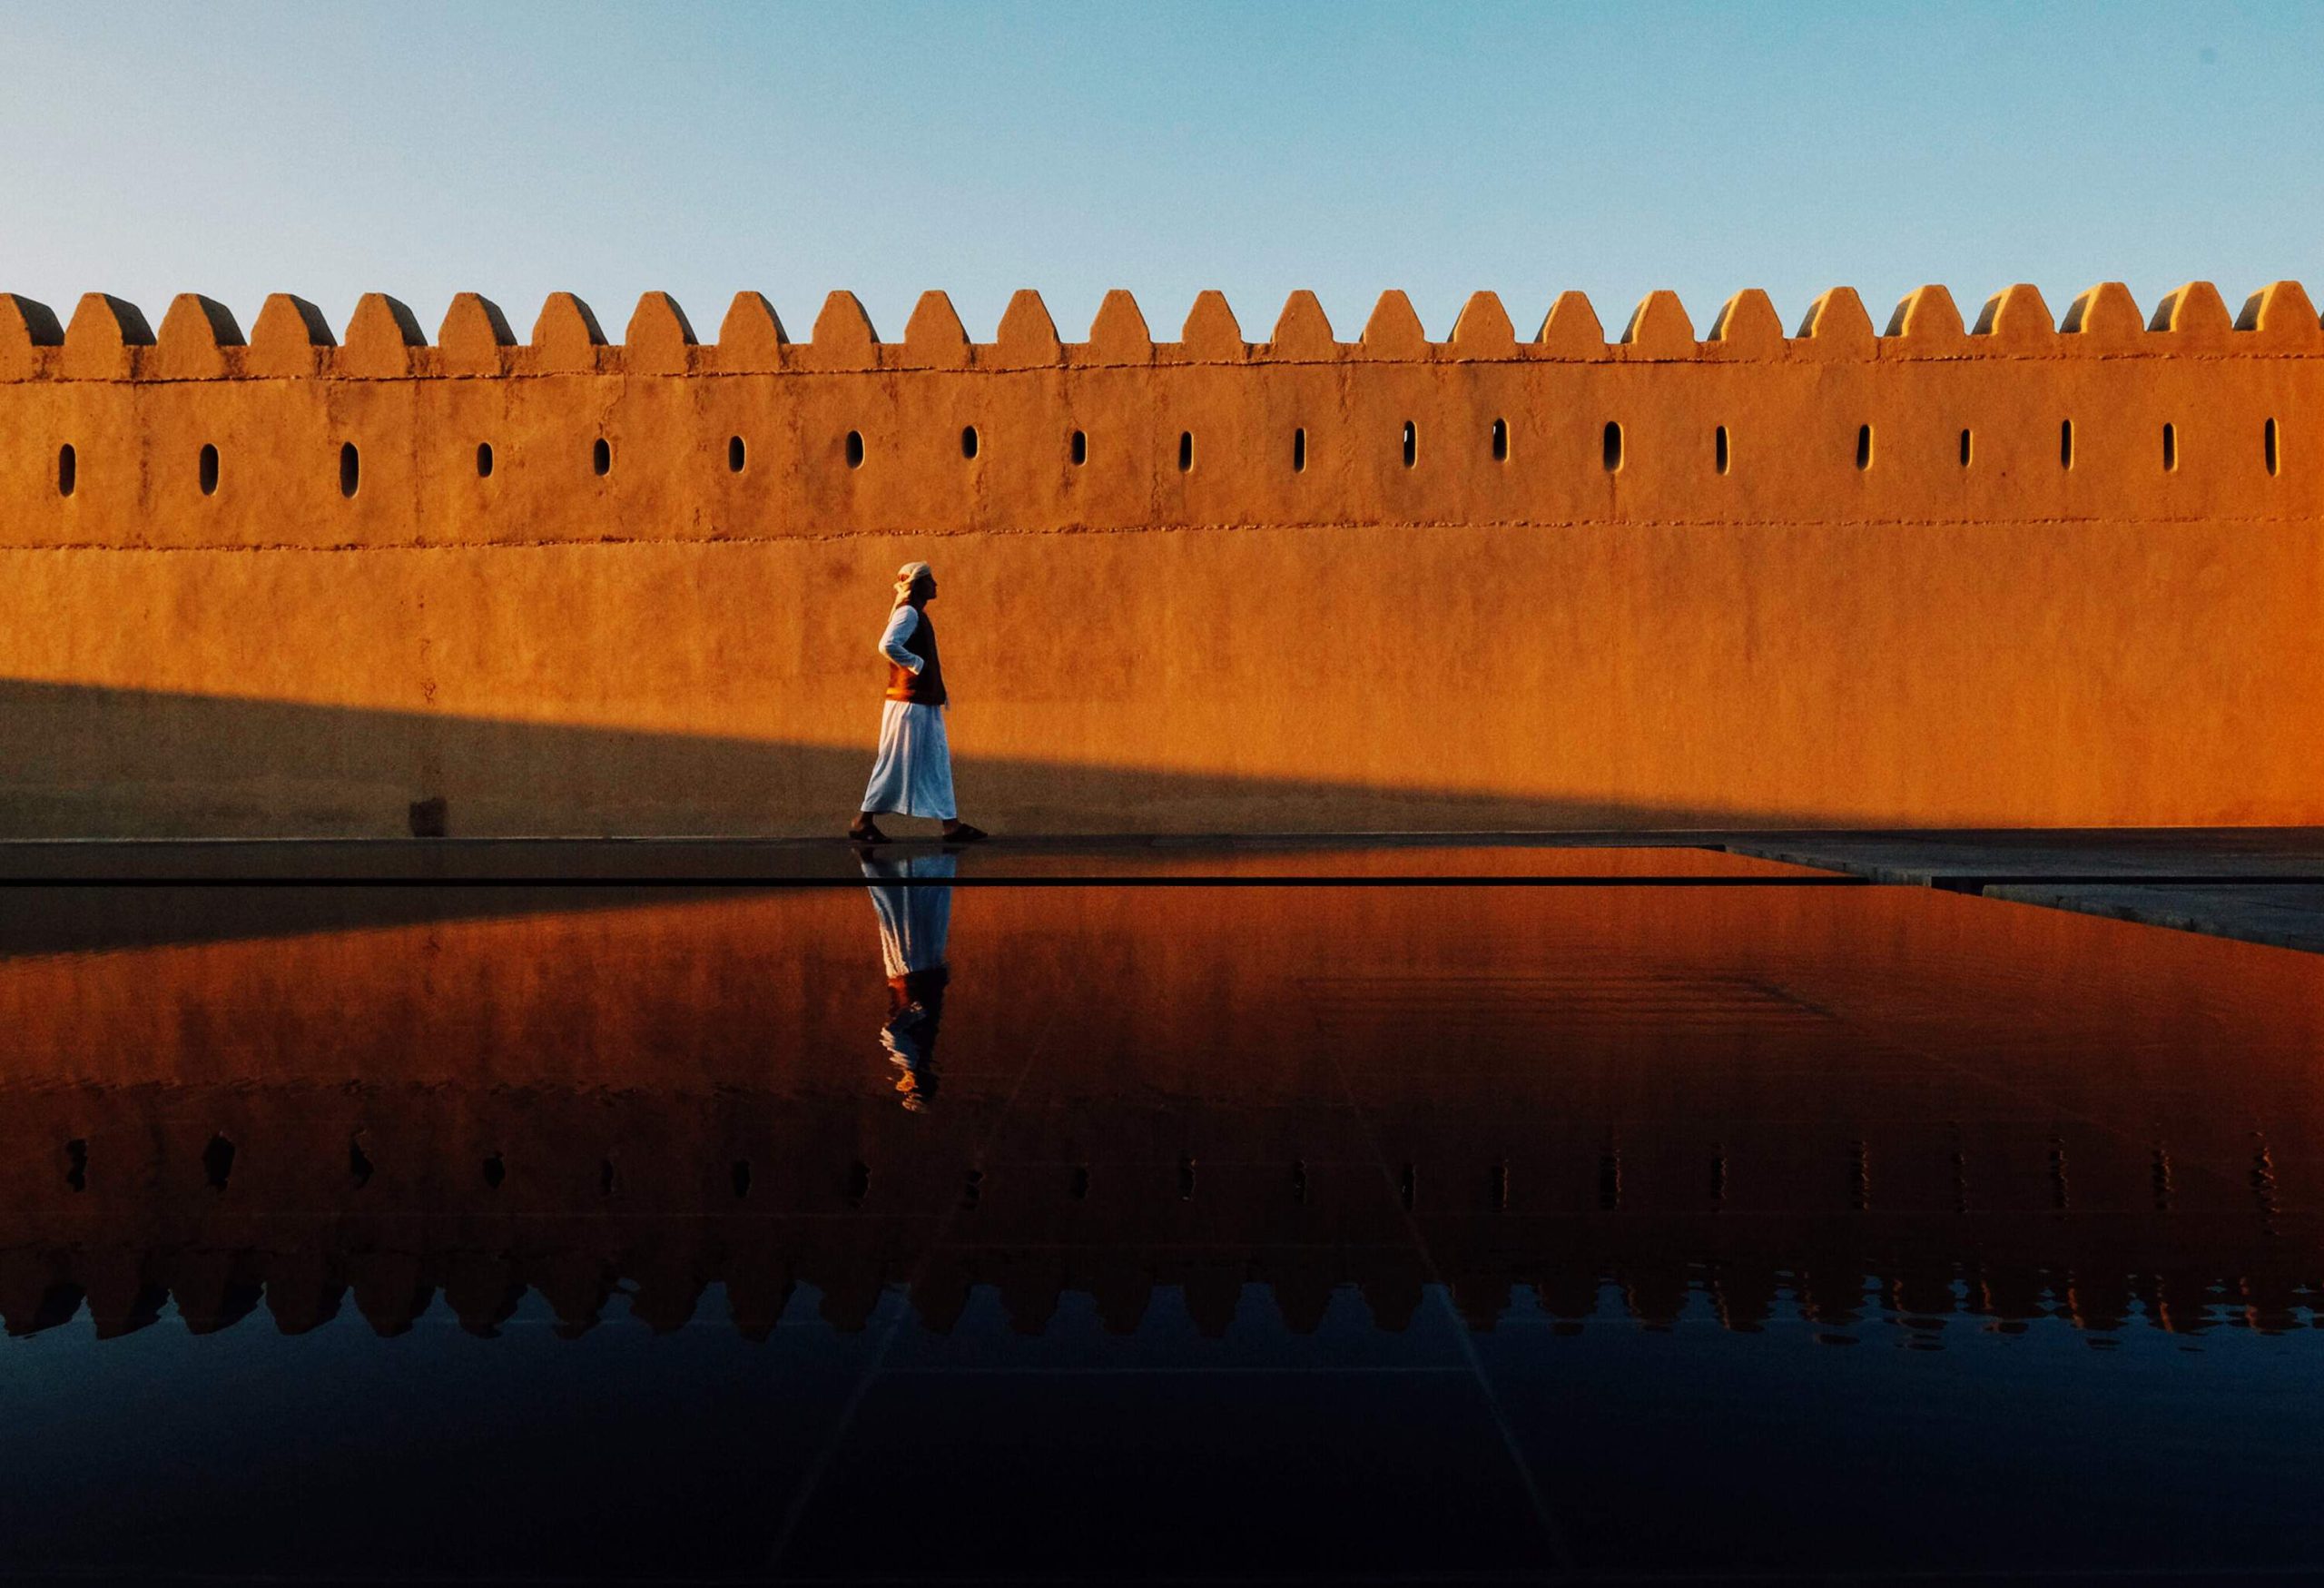 A man walking along a fortress wall with his reflection on the pool of water beside him.